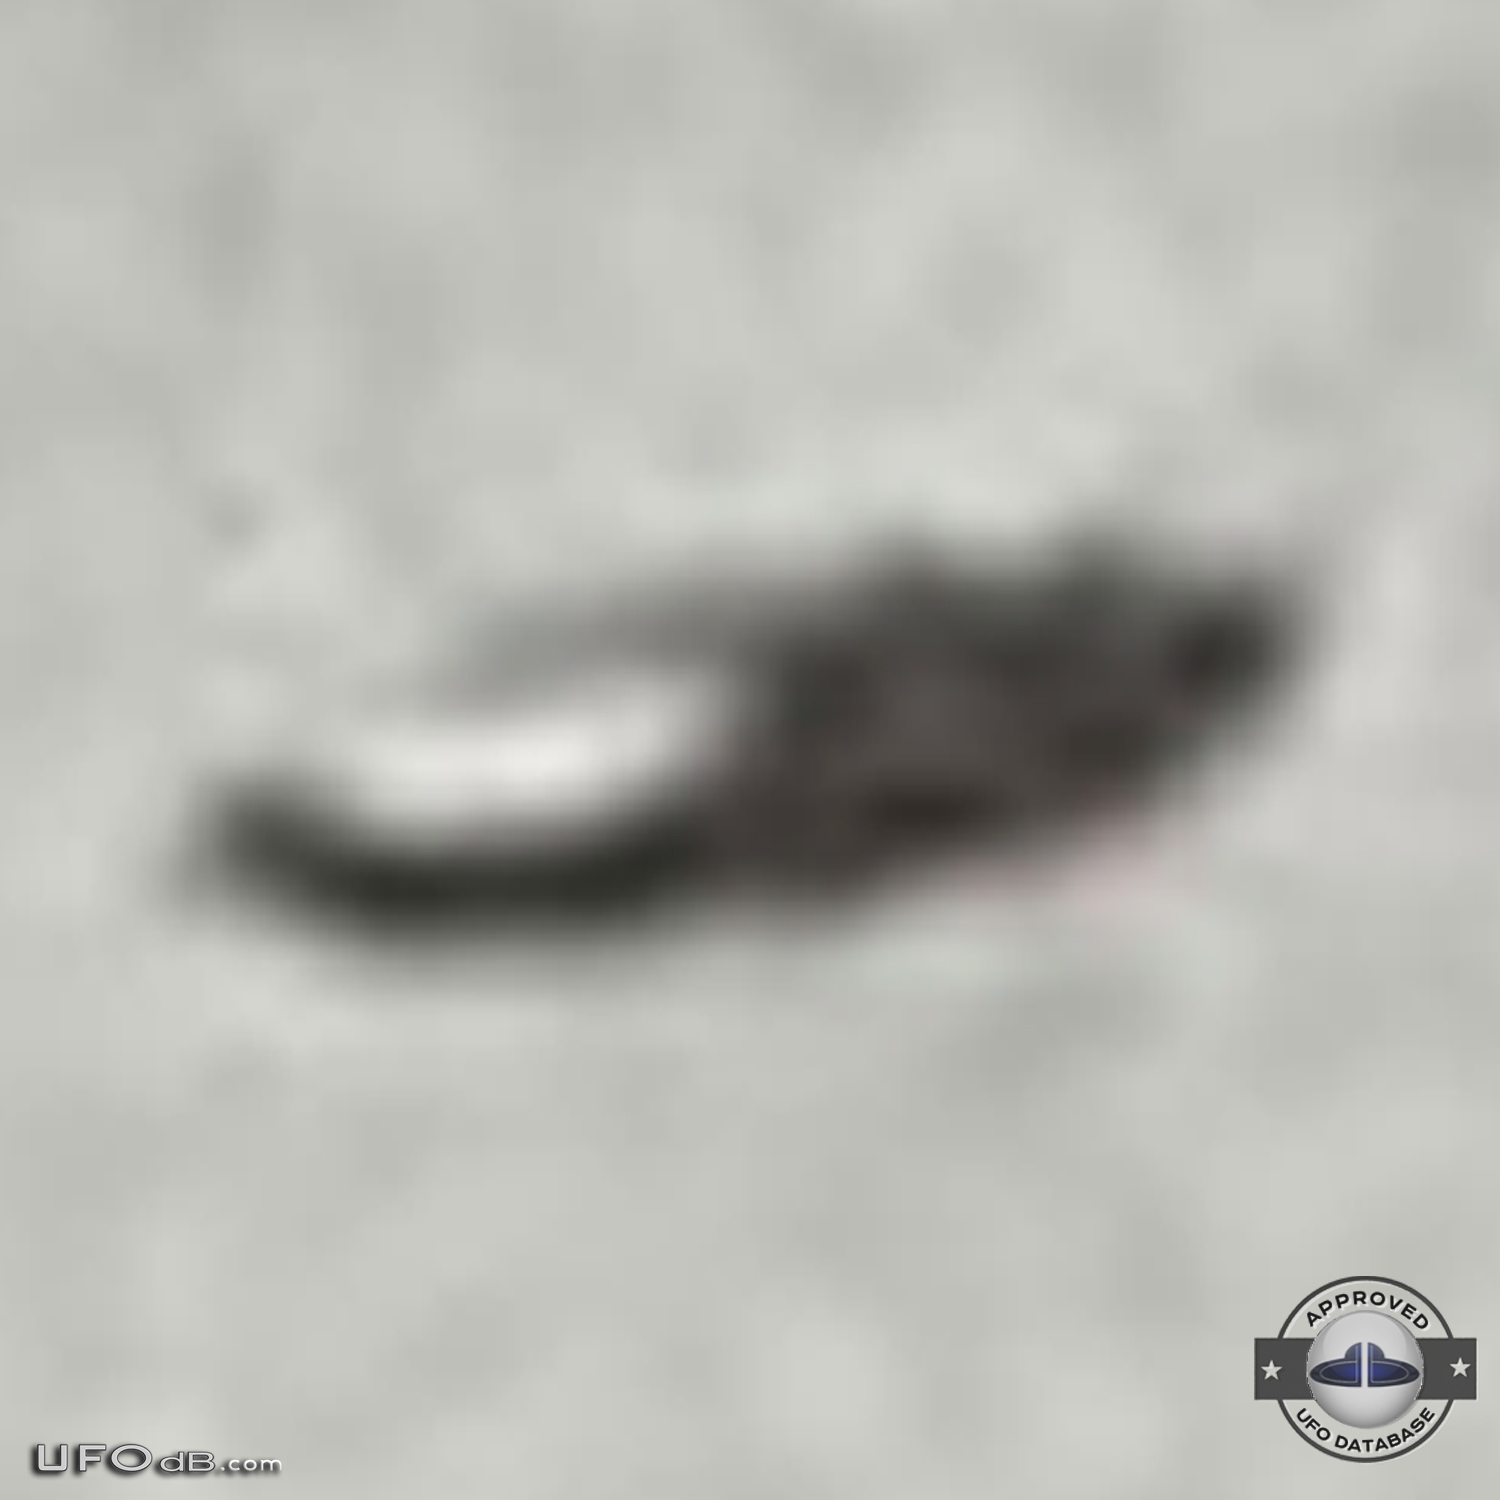 1967 Calgary UFO picture considered to be in the top 10 of all times UFO Picture #448-5